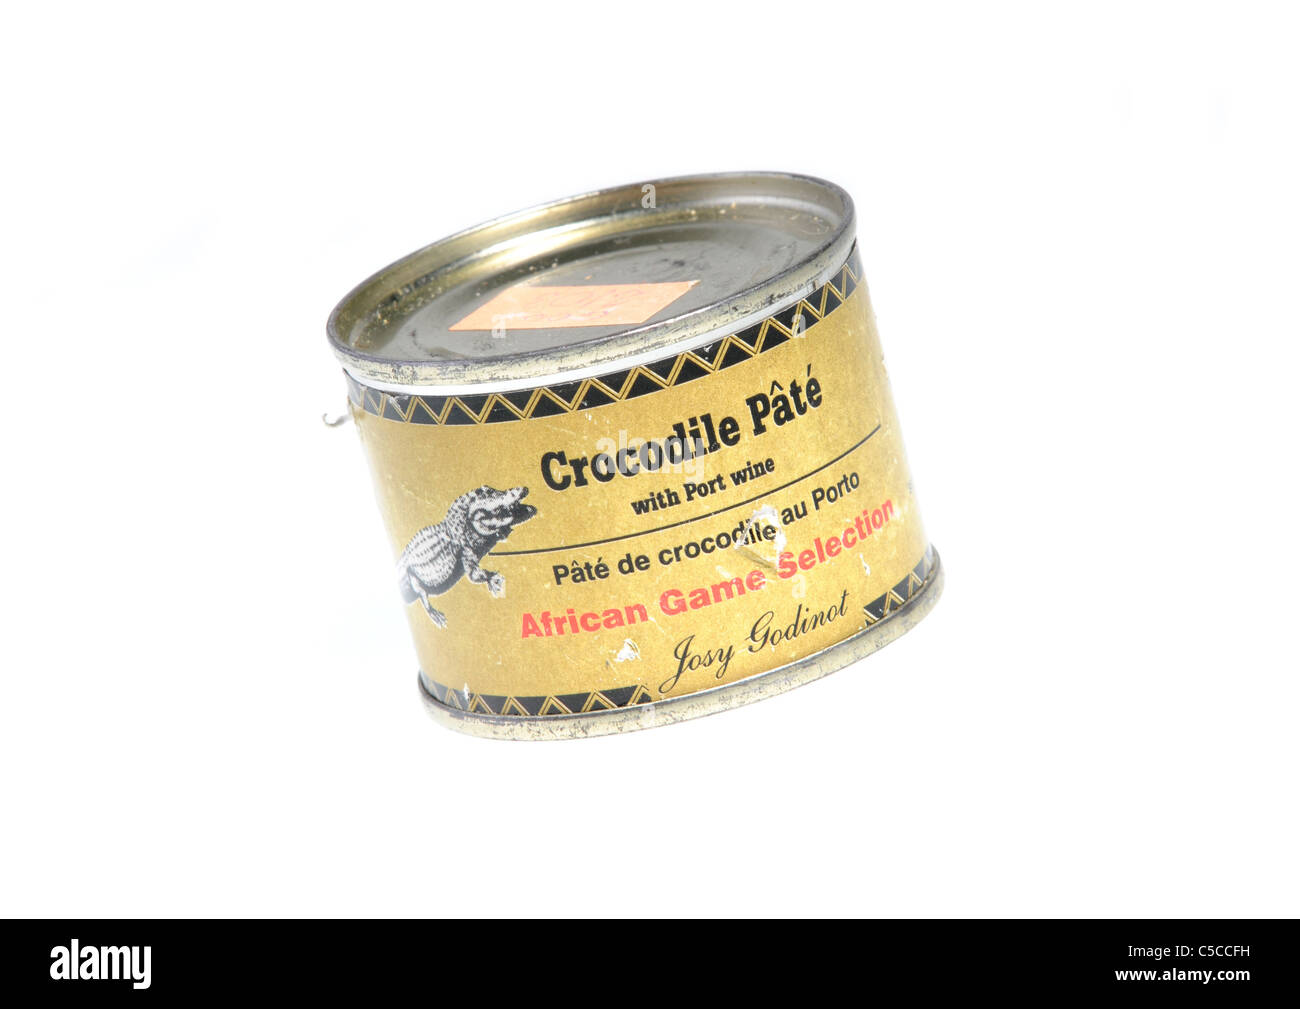 illegal endangered species product from CITES list - canned Crocodile pate with Port wine Stock Photo